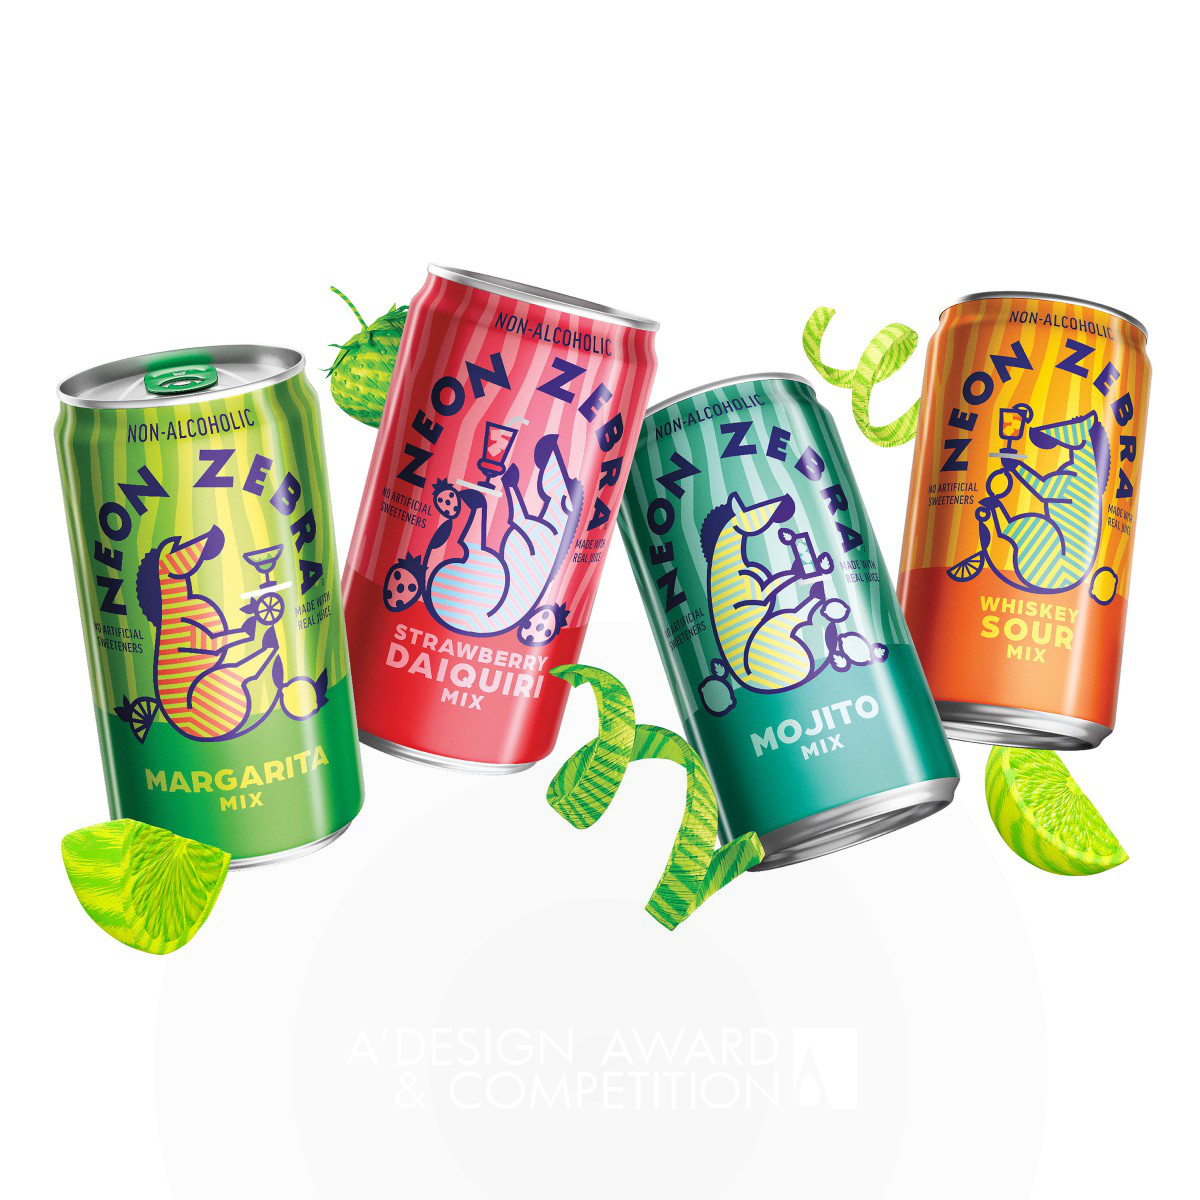 Neon Zebra Brand Launch Beverage Packaging by PepsiCo Design and Innovation